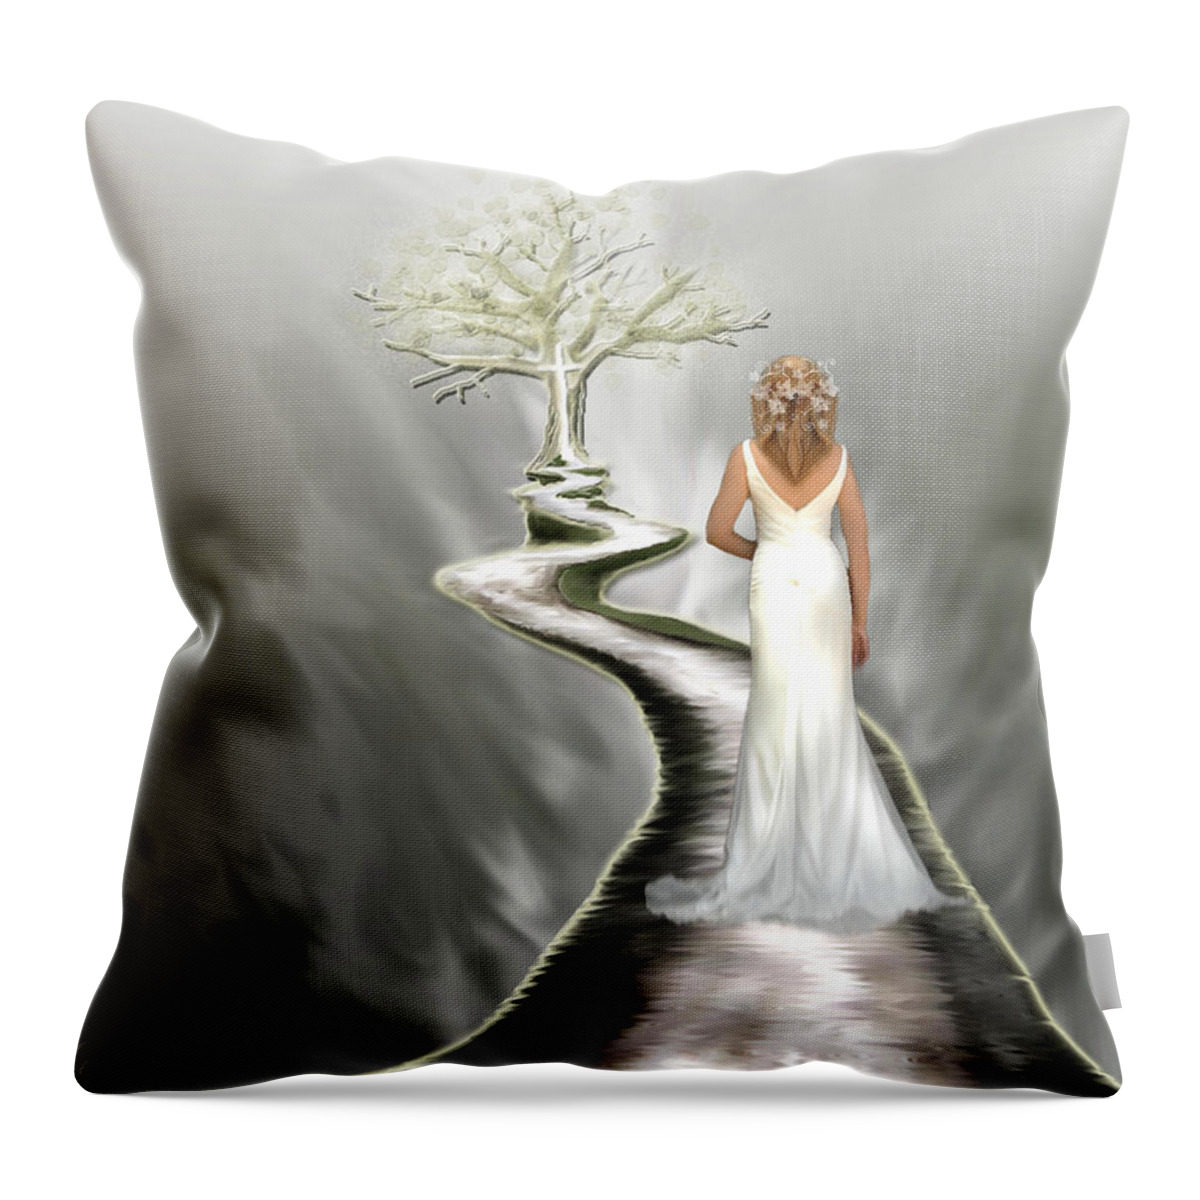 Bride Of Christ Throw Pillow featuring the digital art Bride of Christ by Jennifer Page